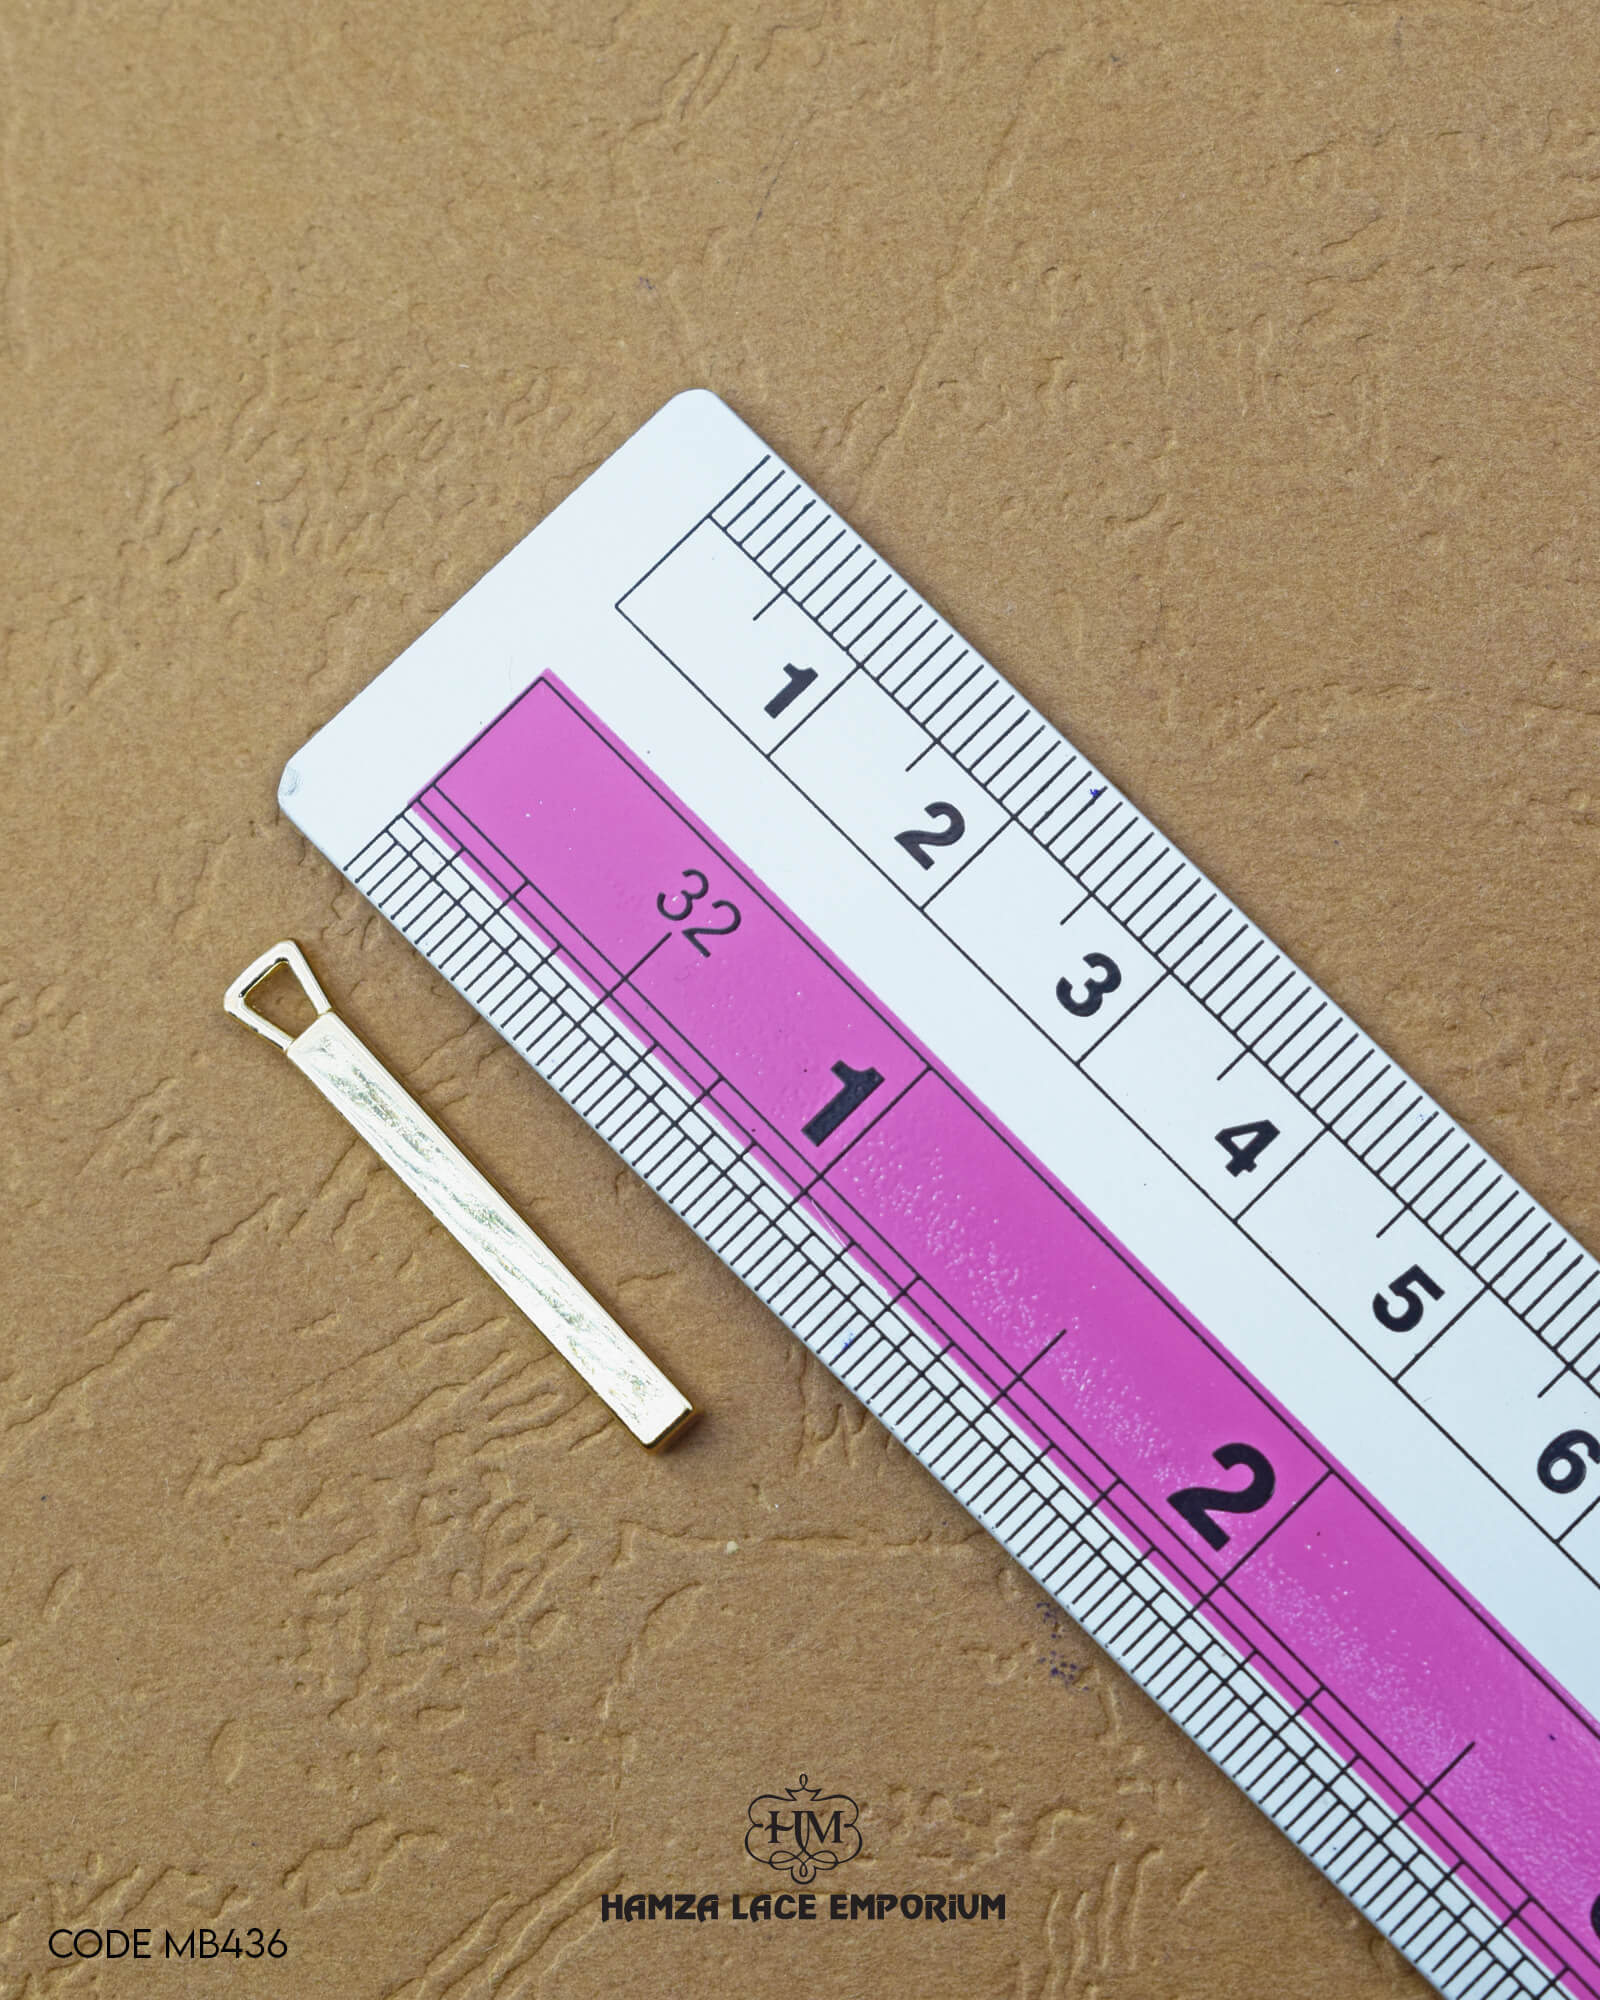 Size of the 'Metal Hanging MB436' is given with the help of a ruler